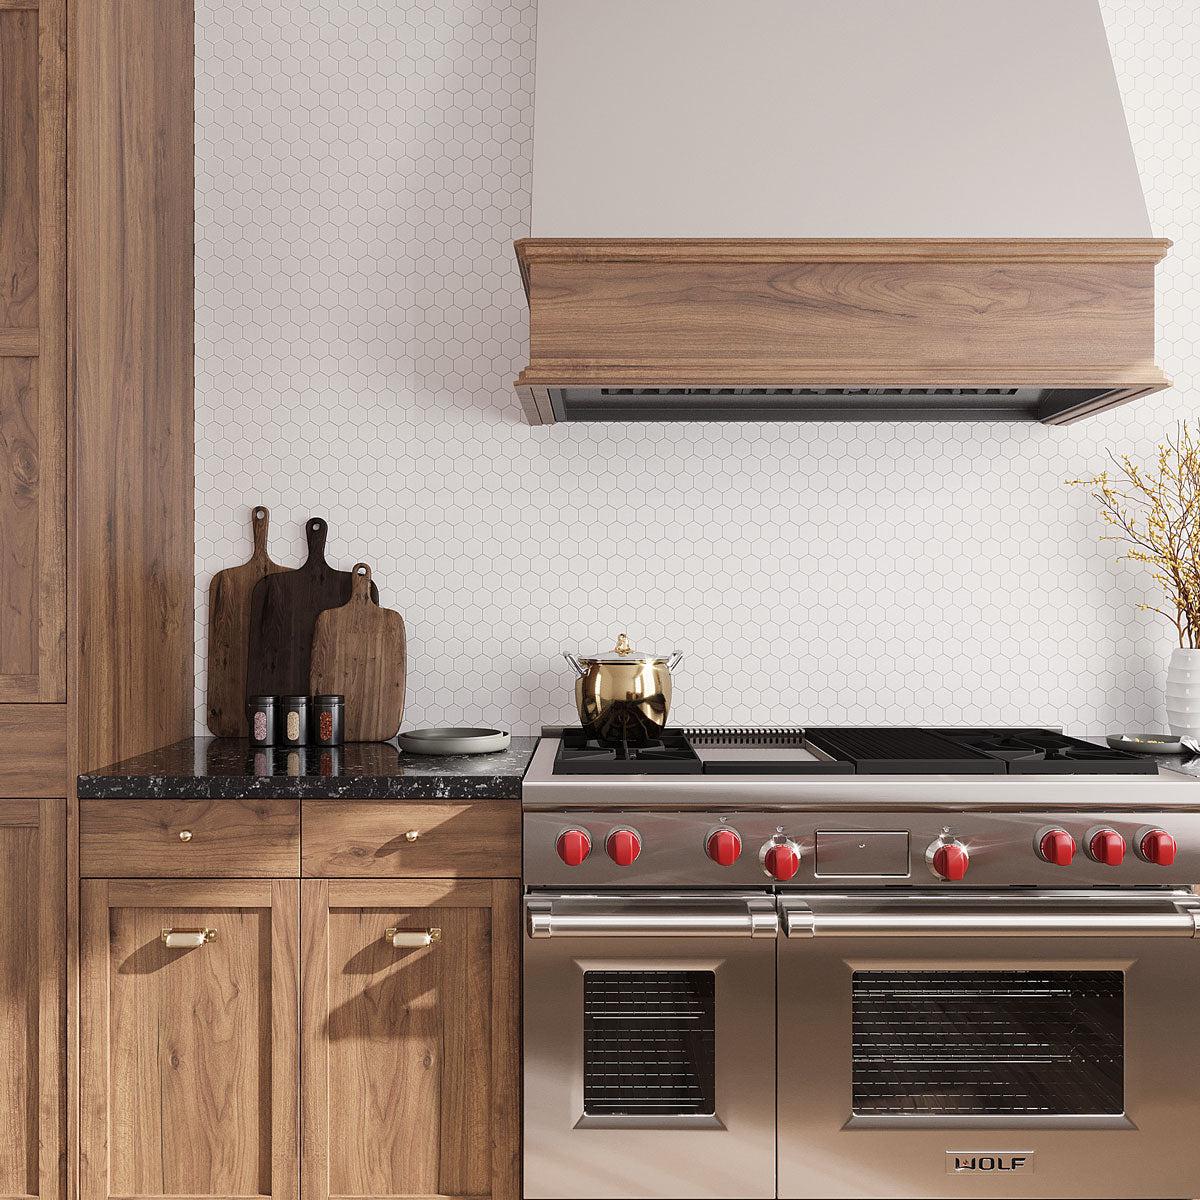 Thassos White Marble hexagon wall tiles for a kitchen backsplash with a natural wood range hood